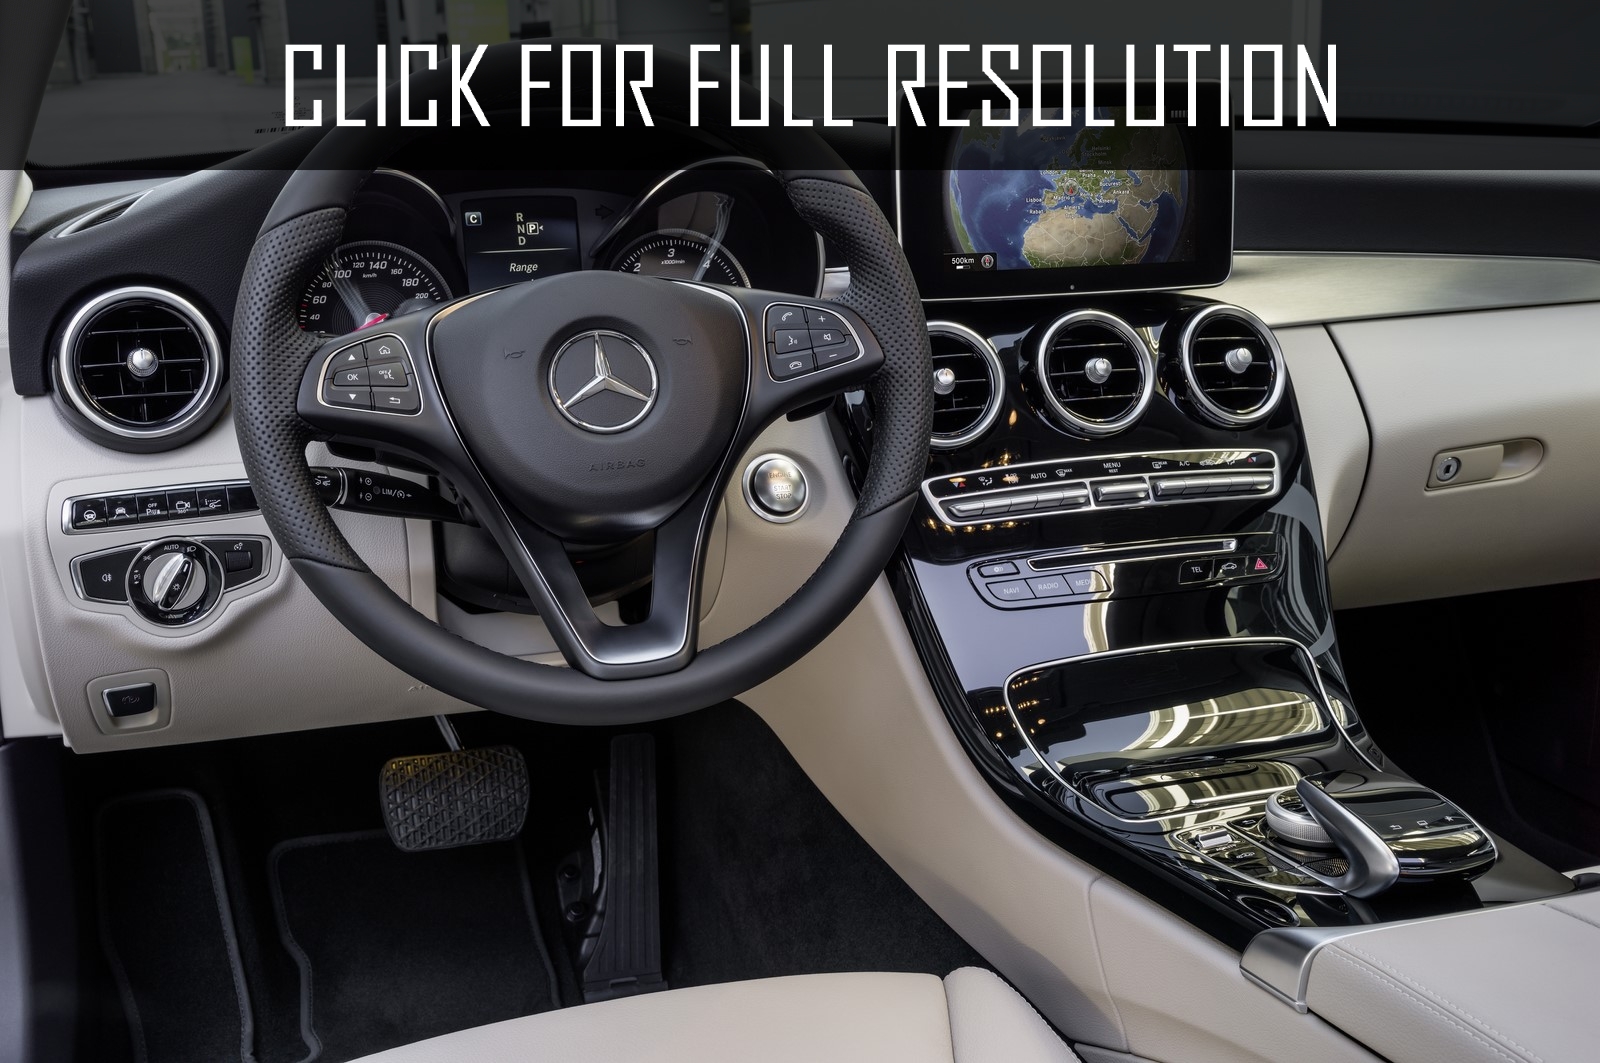 2014 Mercedes Benz C Class Amg Best Image Gallery 4 21 Share And Download